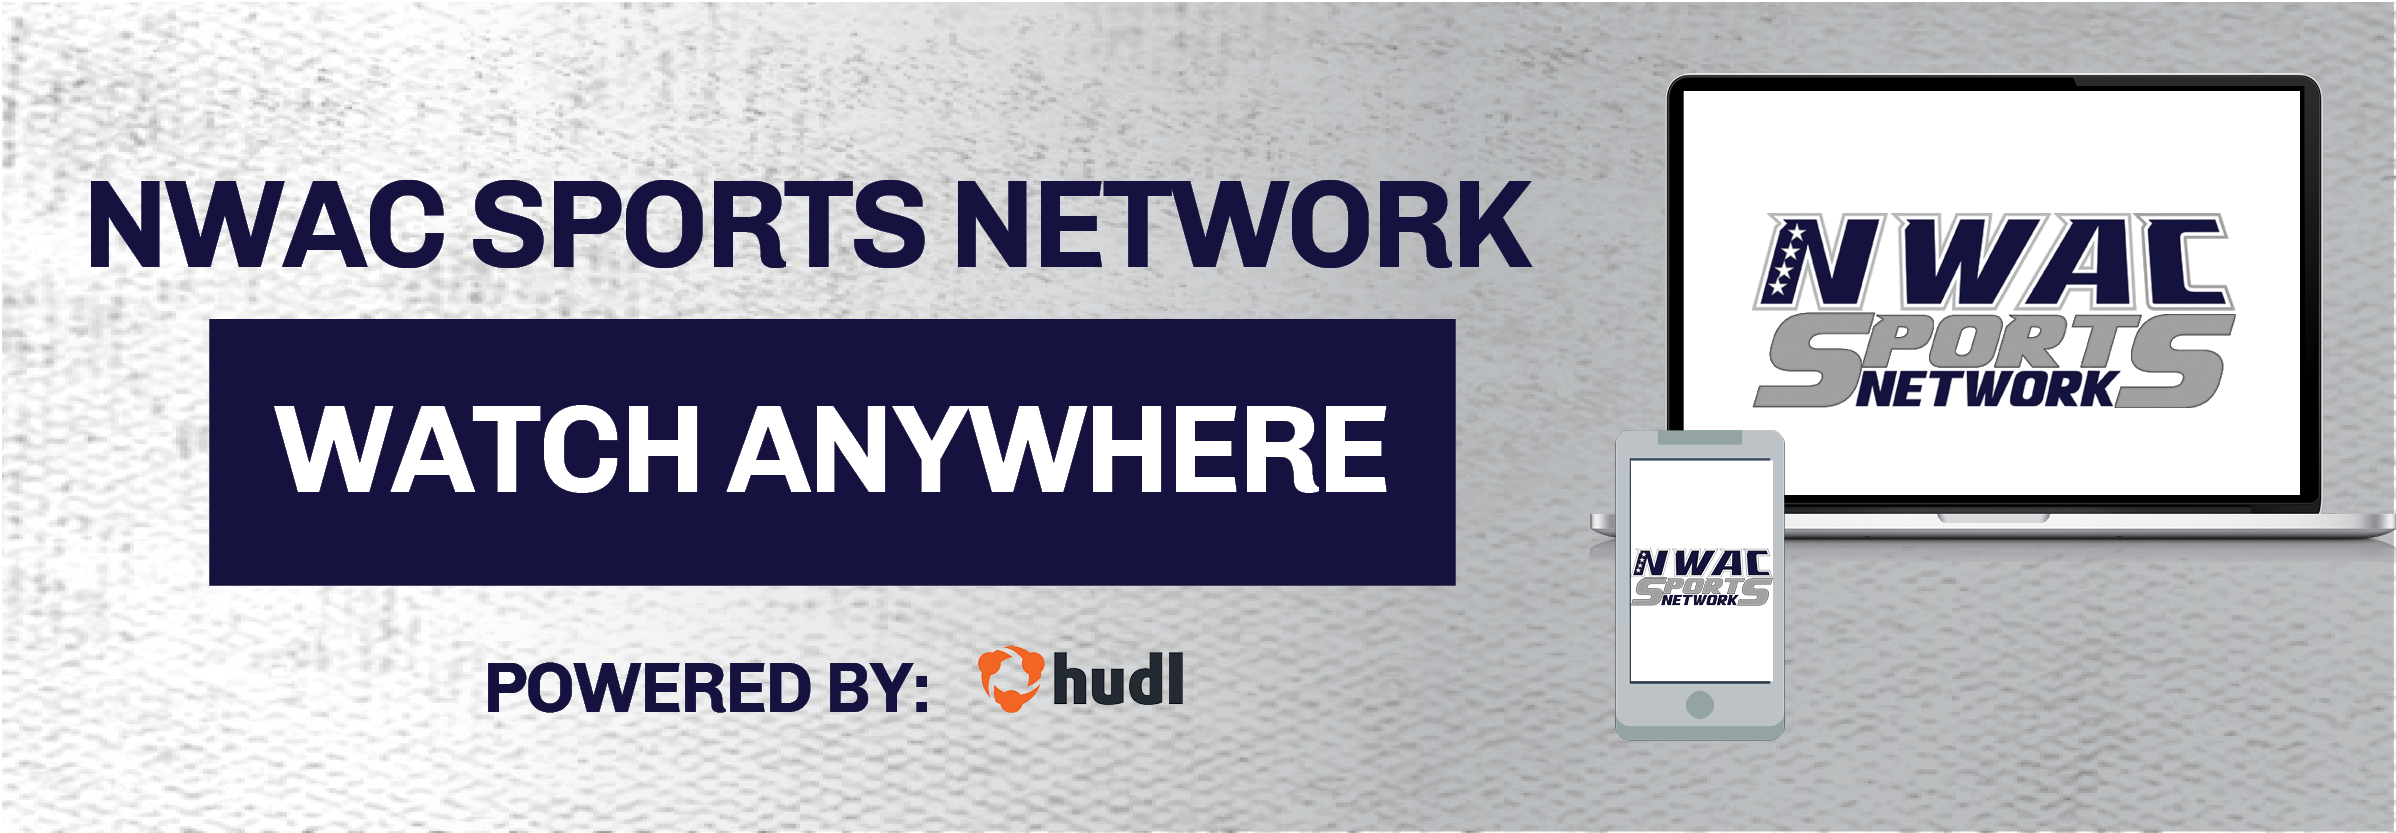 Watch the NWAC Sports Network anywhere powered by Hudl